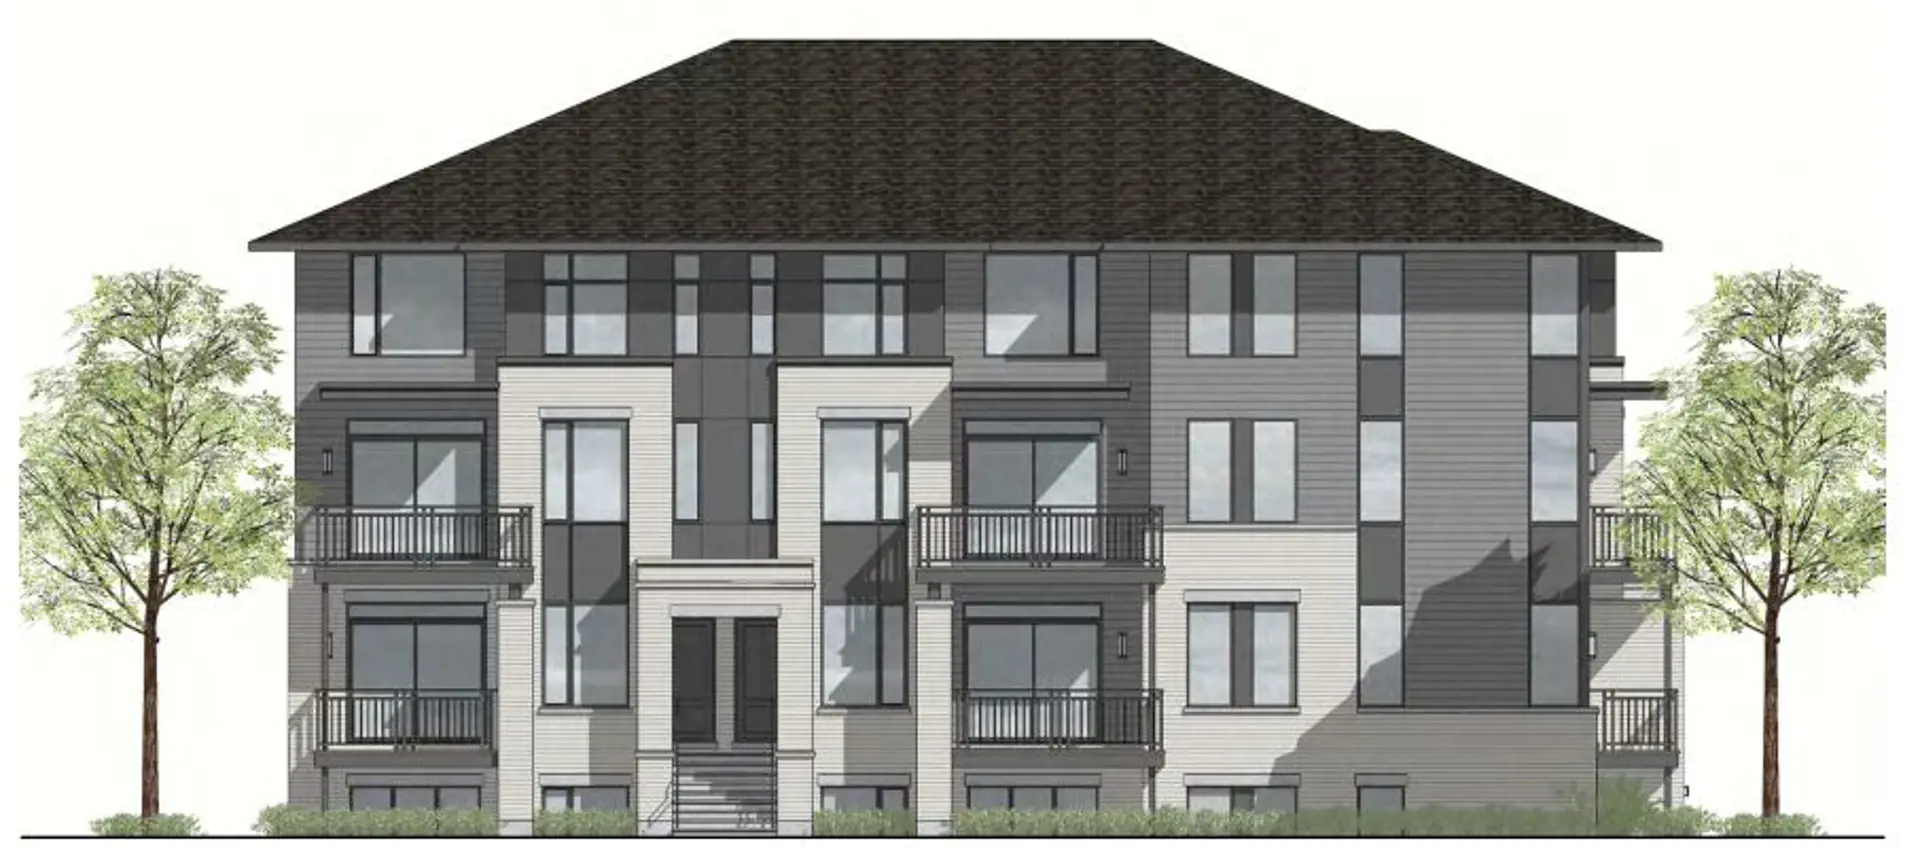 4639 Bank Street Townhomes located at 4639 Bank Street, Ottawa, ON image